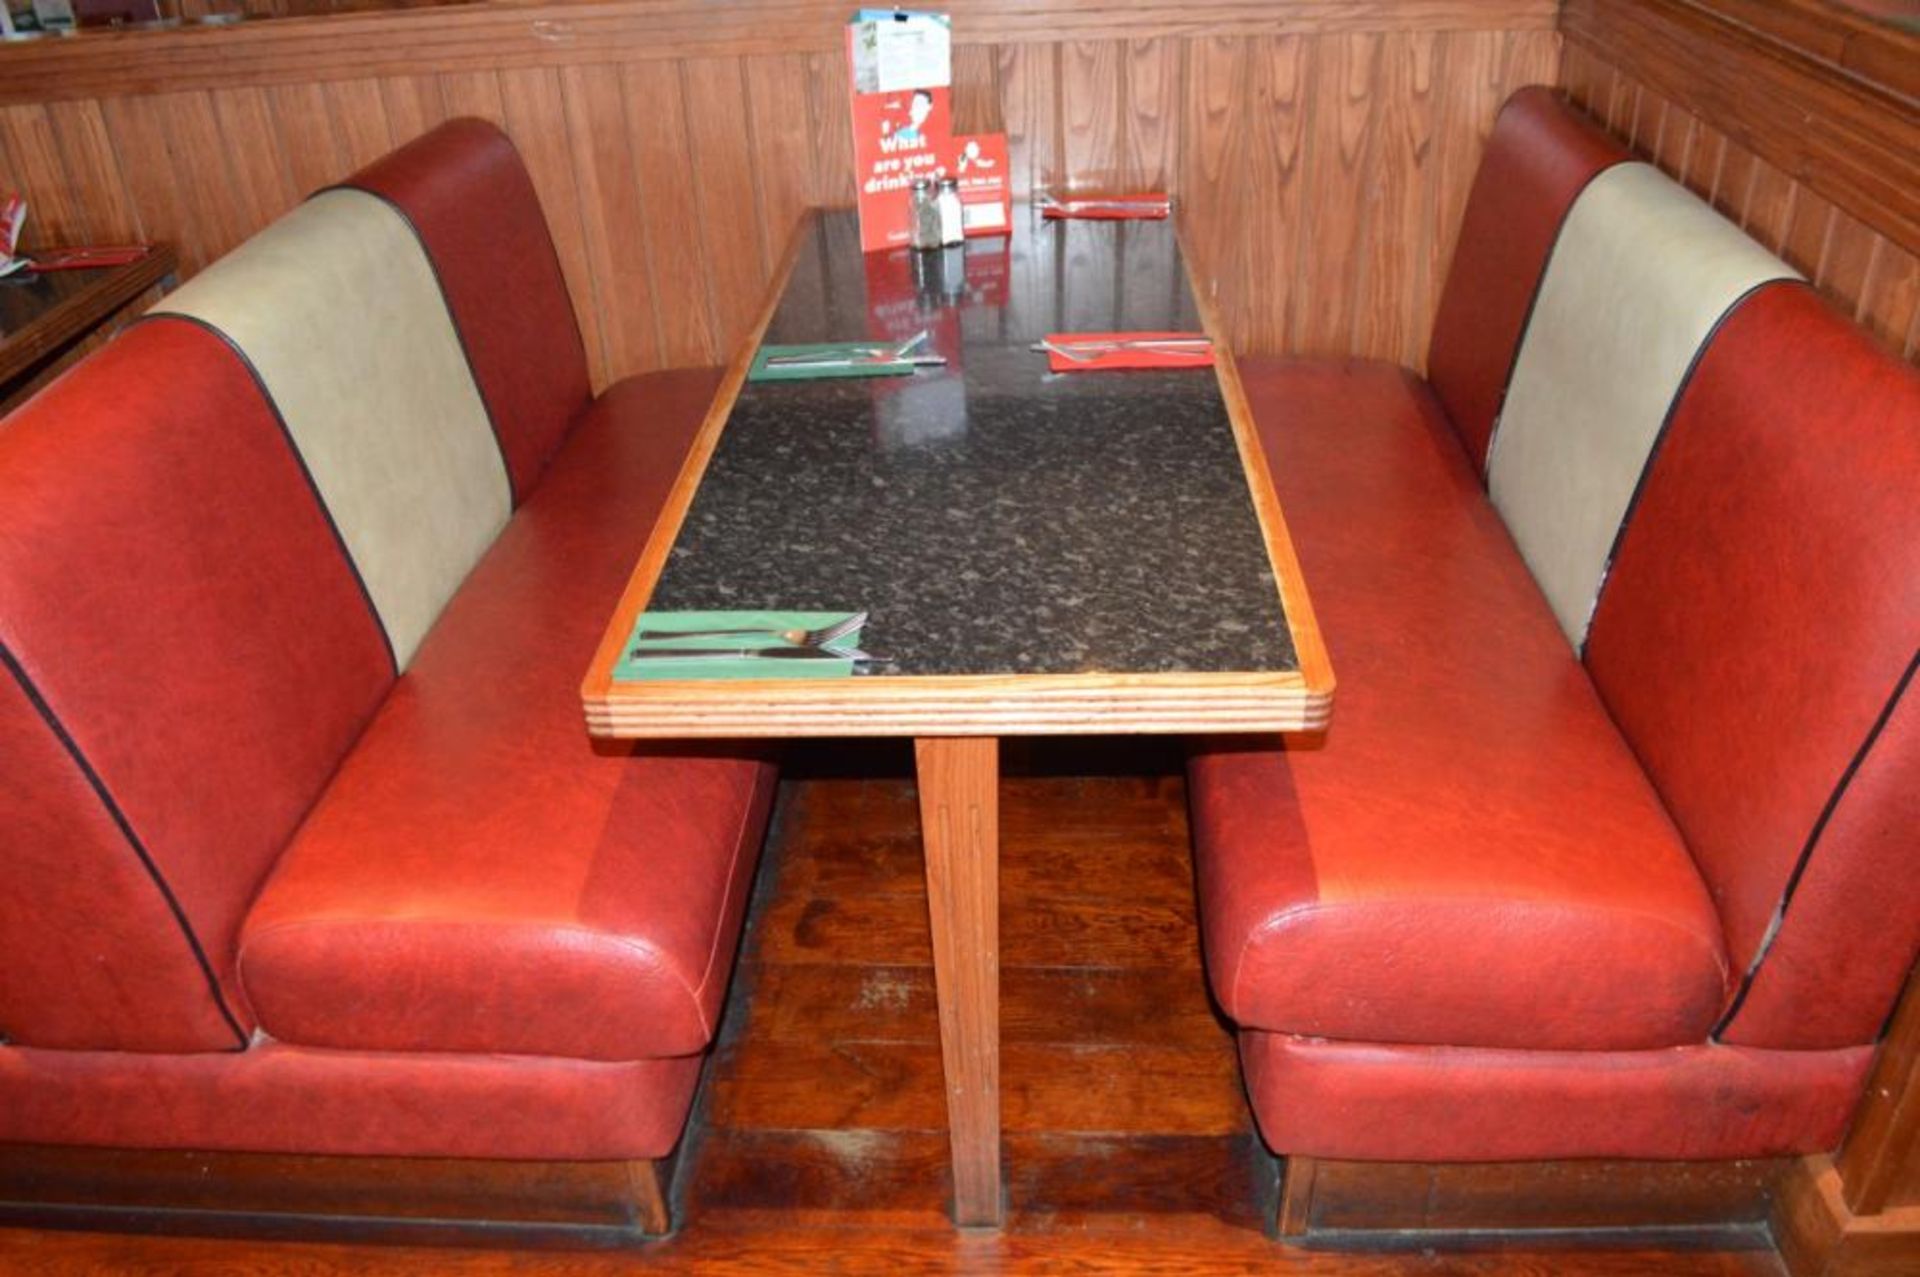 1 x Selection of Cosy Bespoke Seating Booths in a 1950's Retro American Diner Design With Dining Tab - Image 5 of 30